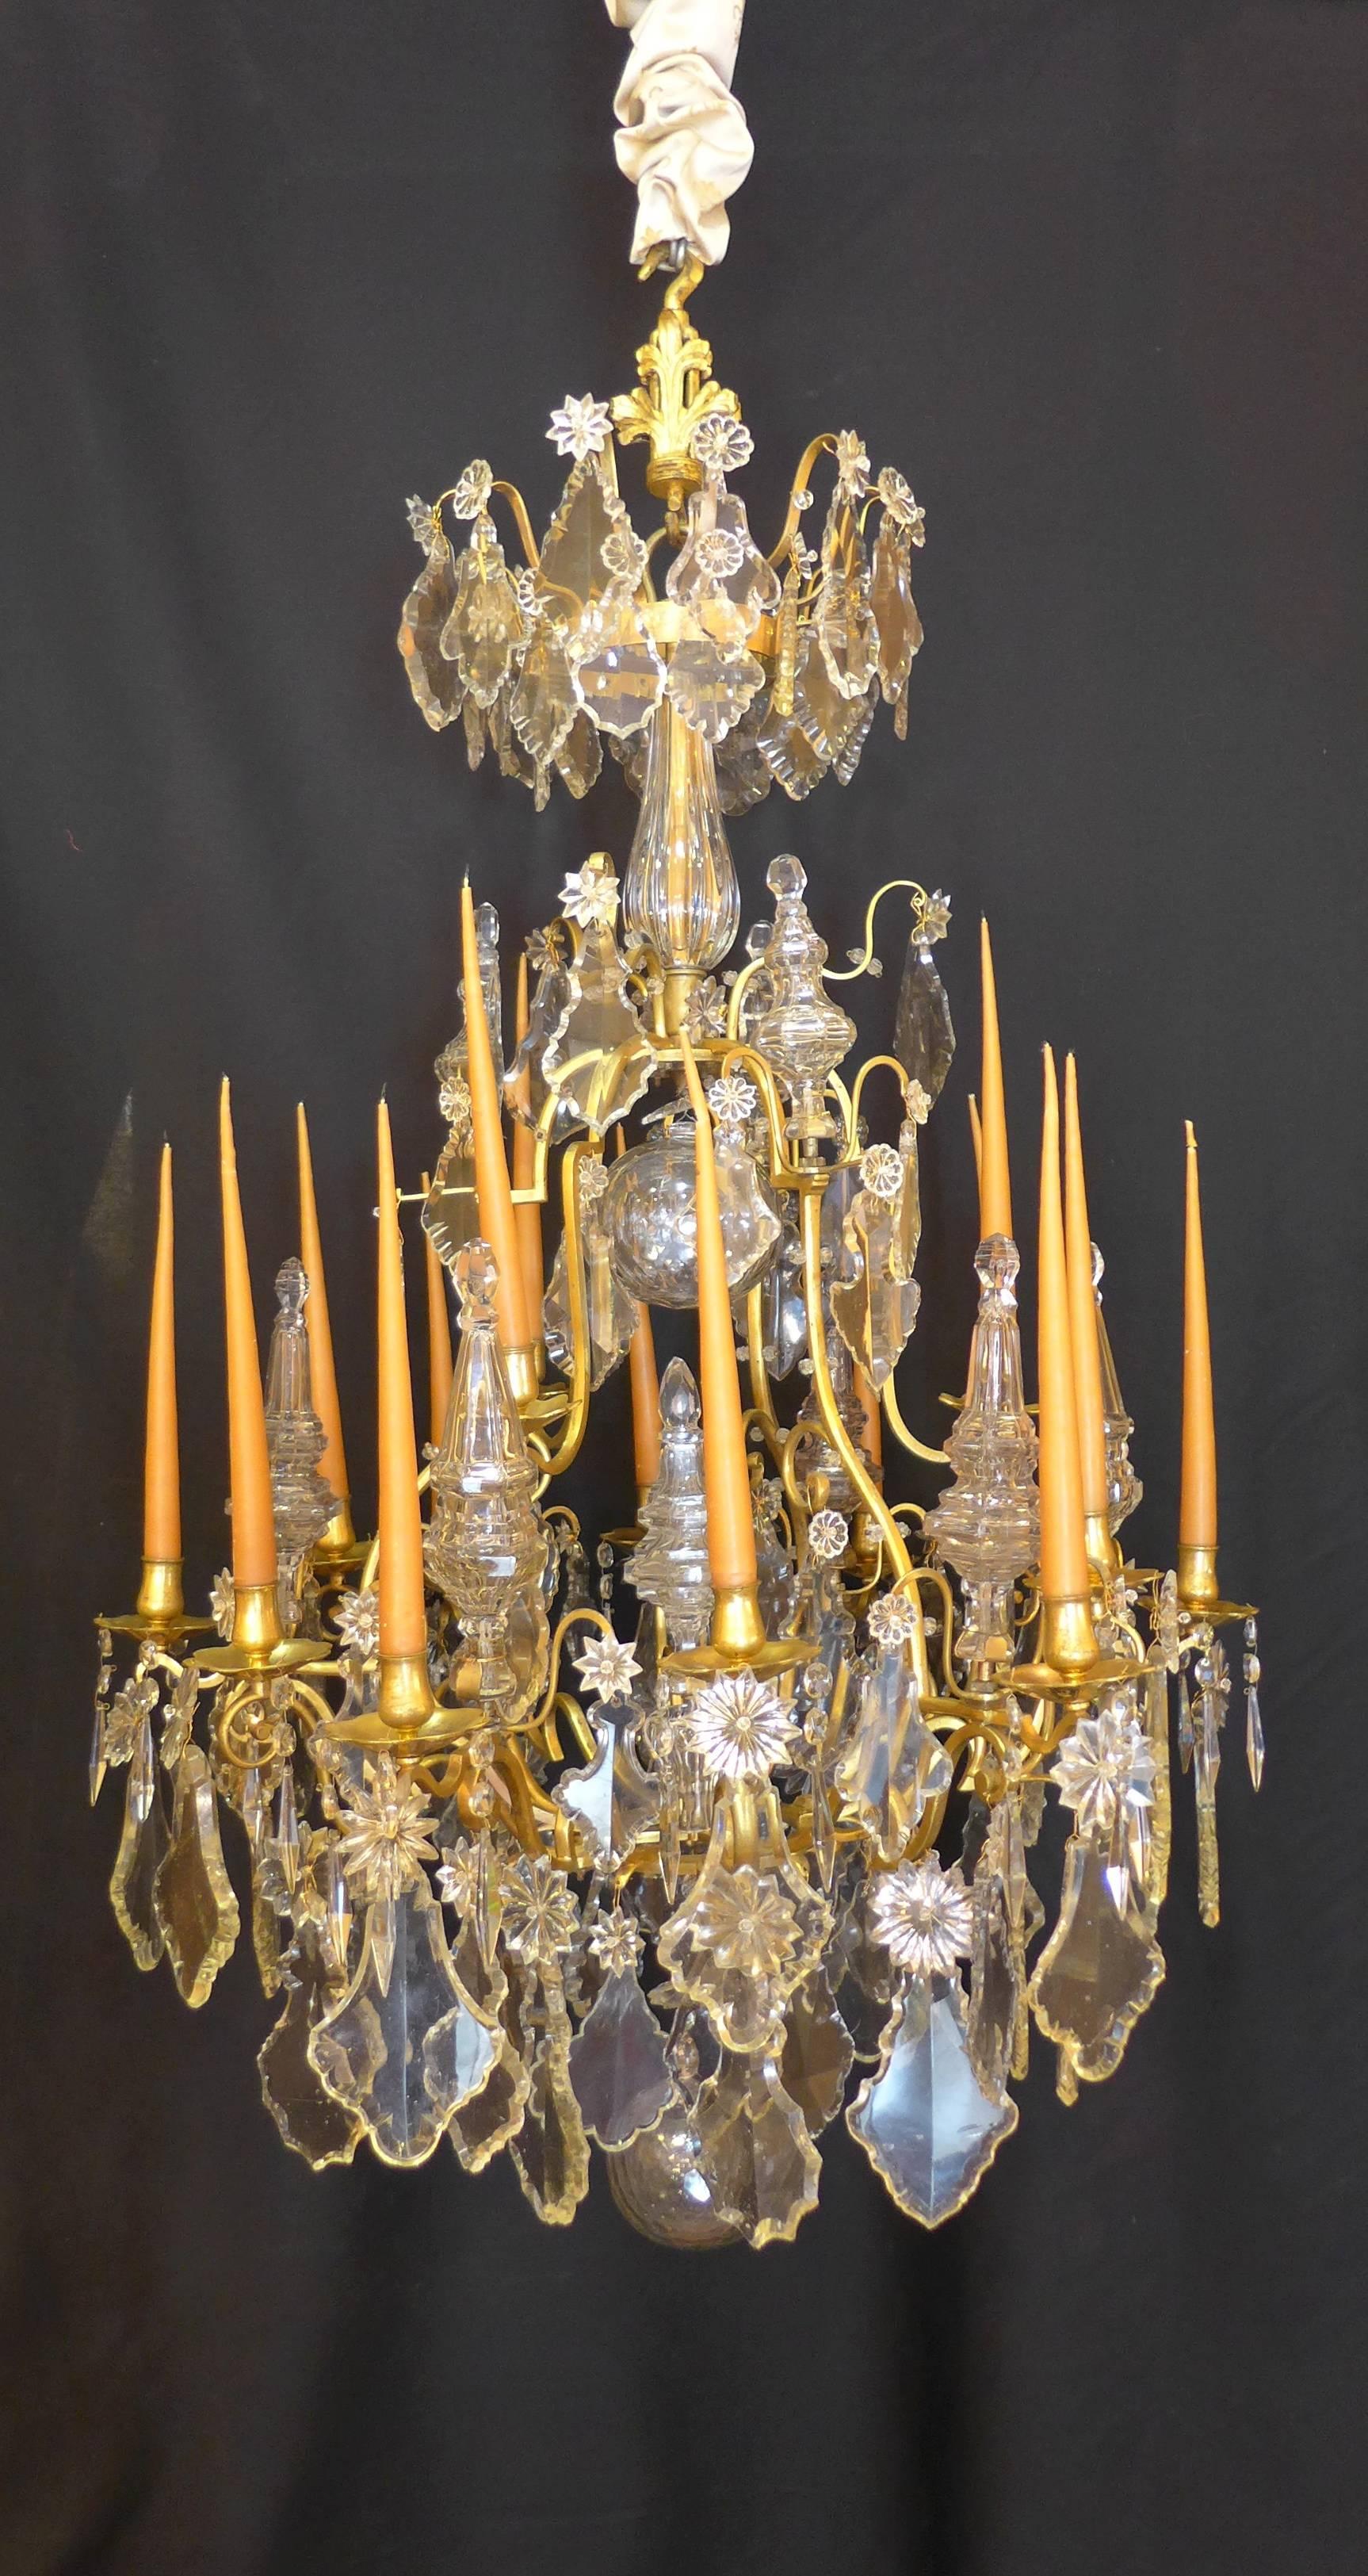 A sensational and extremely rare, unique high quality French mid-18th century, in a classical Louis XV period, ormolu and hand-cut crystal, form cage chandelier.
Our chandelier is composed of fifteen elegantly scrolled arm lights and fourteen